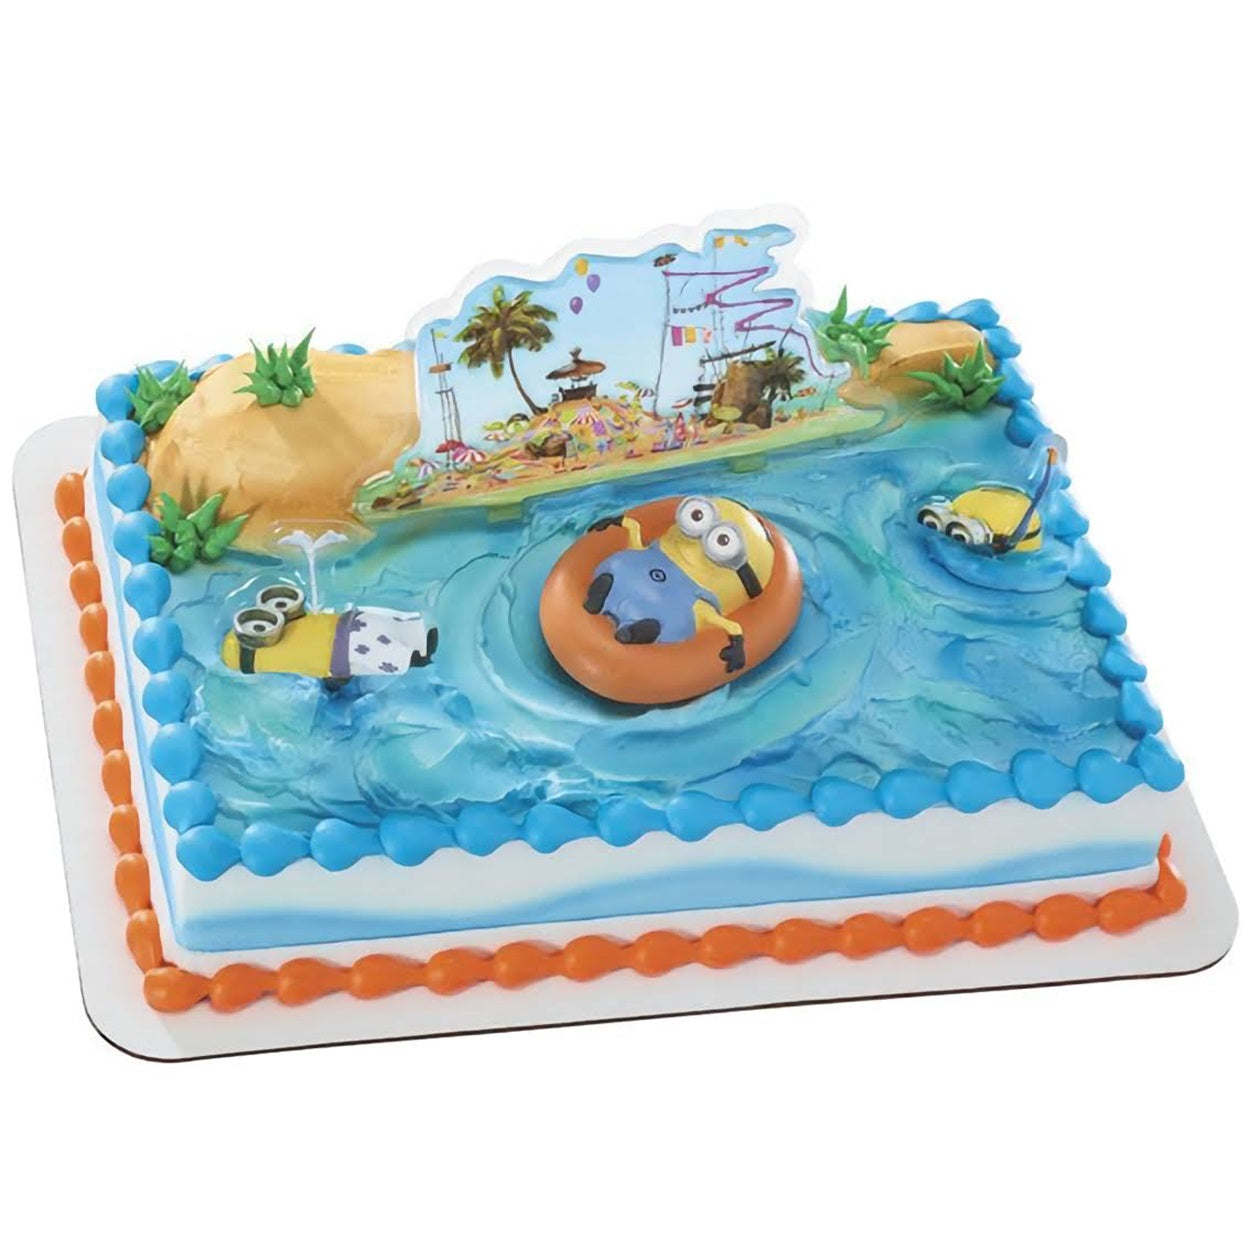 Despicable Me 2 beach party cake decorating set with Minions in a tropical scene, ideal for fun-filled kids' celebrations. Shop this playful cake set and more at Lynn's Cake, Candy, and Chocolate Supplies.